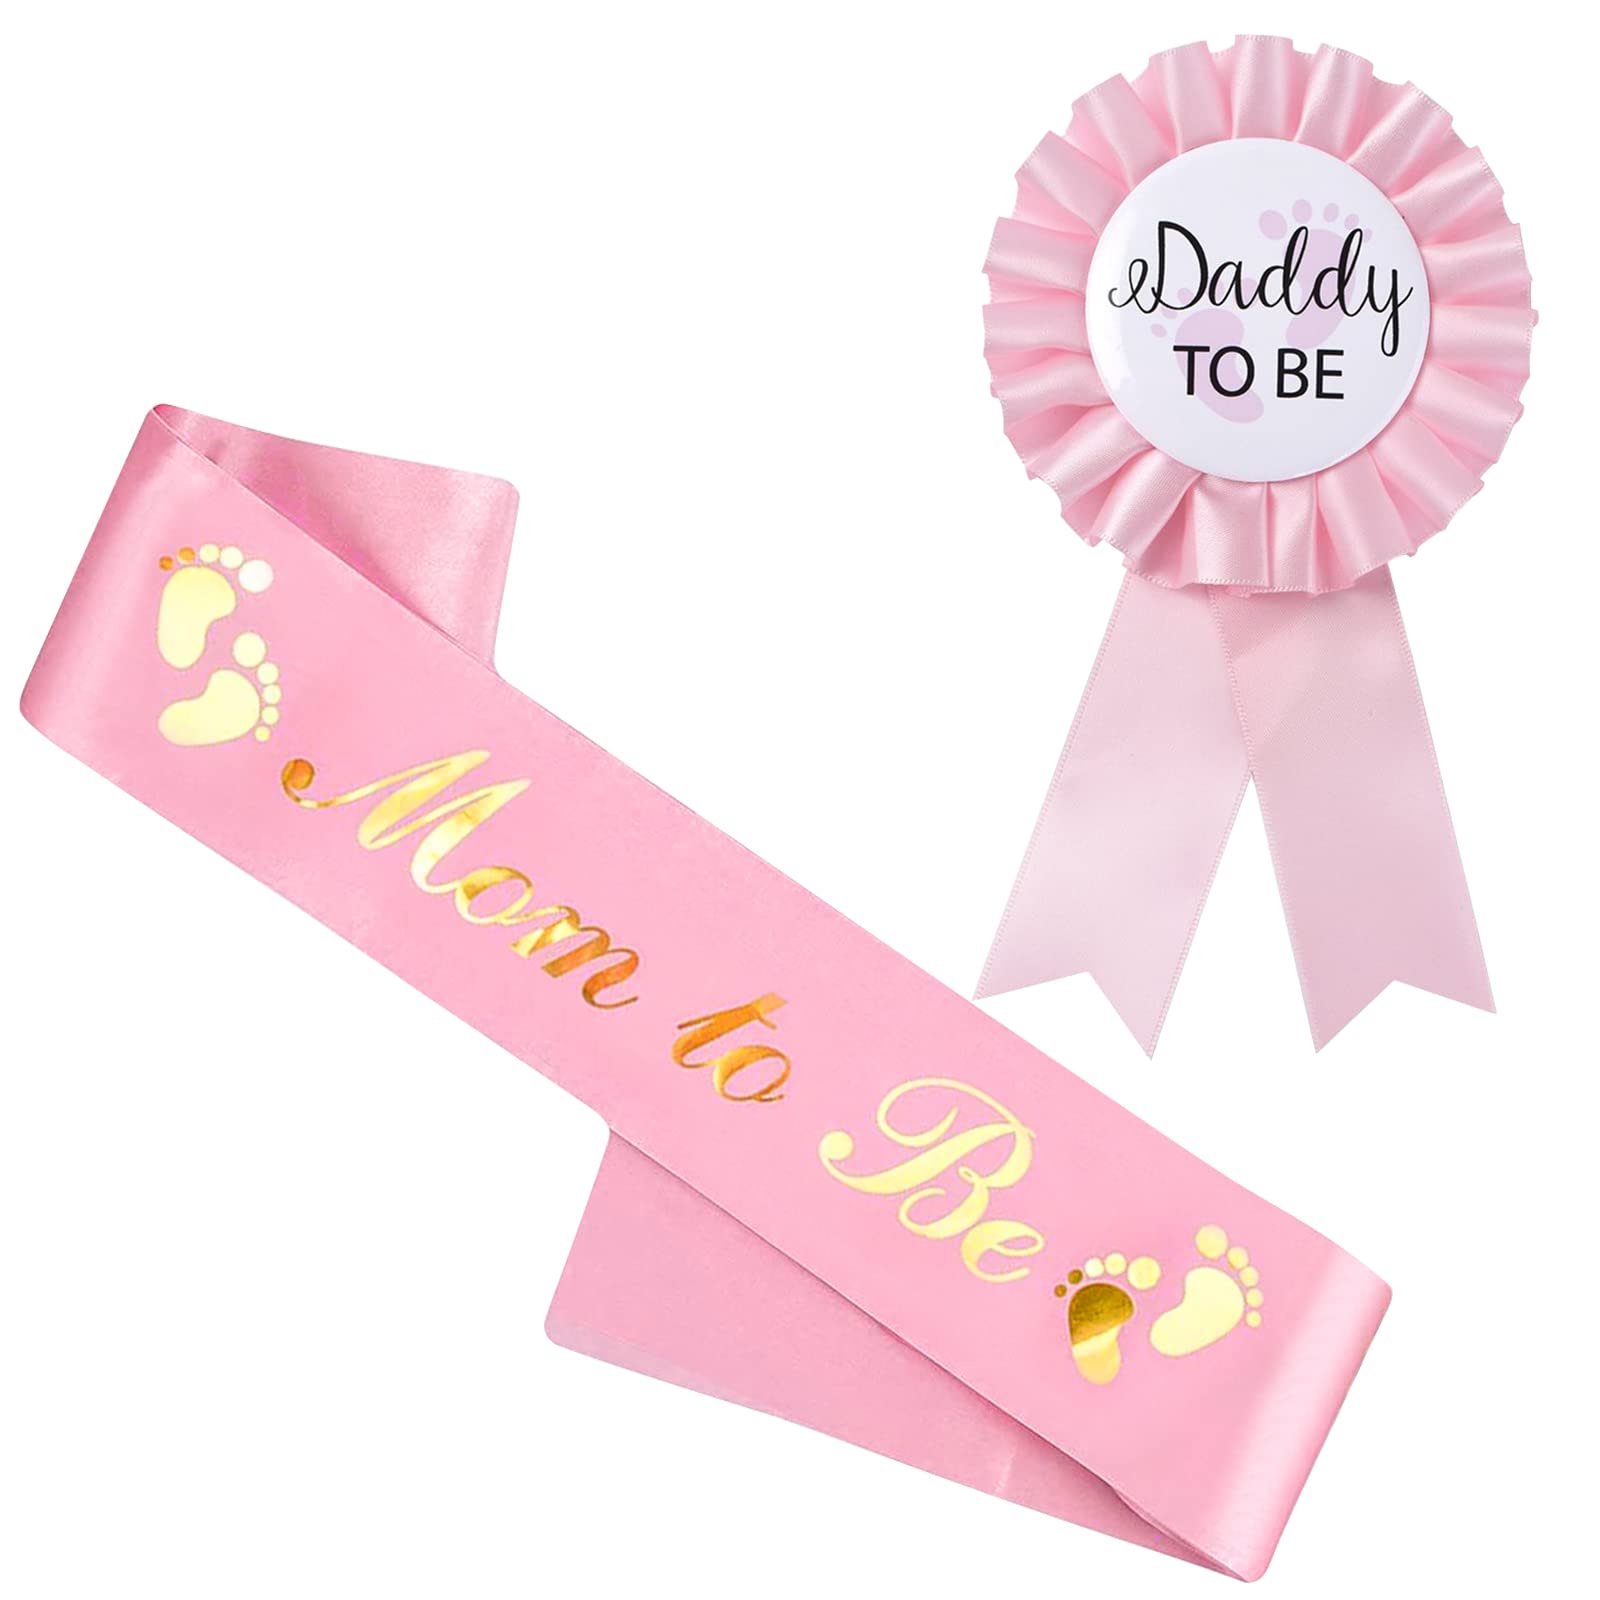 2 Pieces Baby Shower Decorations, Mommy to Be Pink Sash and Daddy to Be Pink Tinplate Badge Baby Welcome Party Gift